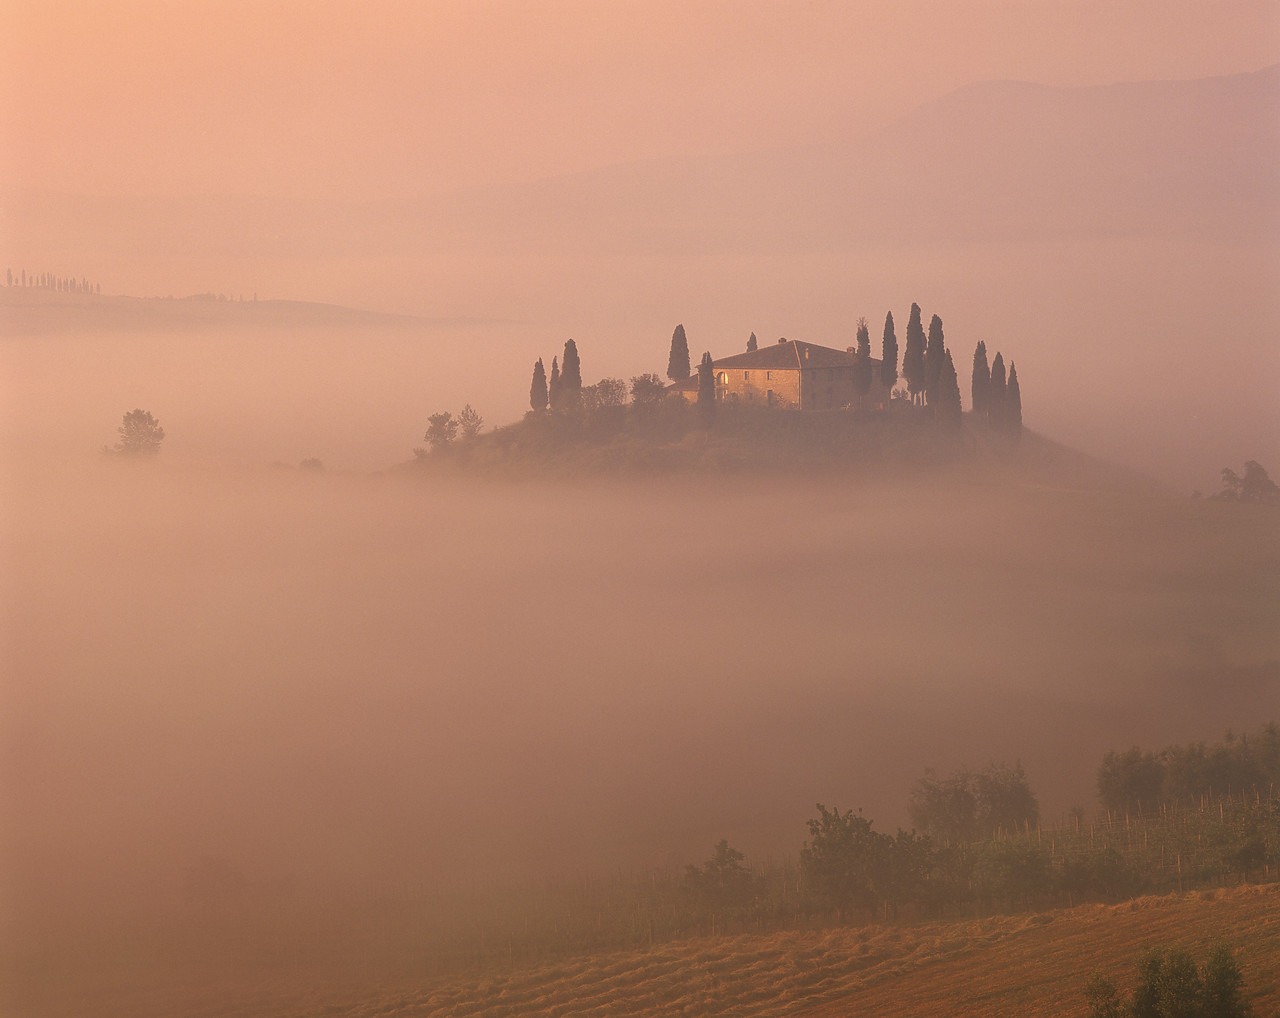 #020130-2 - Belvedere in Fog, San Quirico d'Orcia, Tuscany, Italy